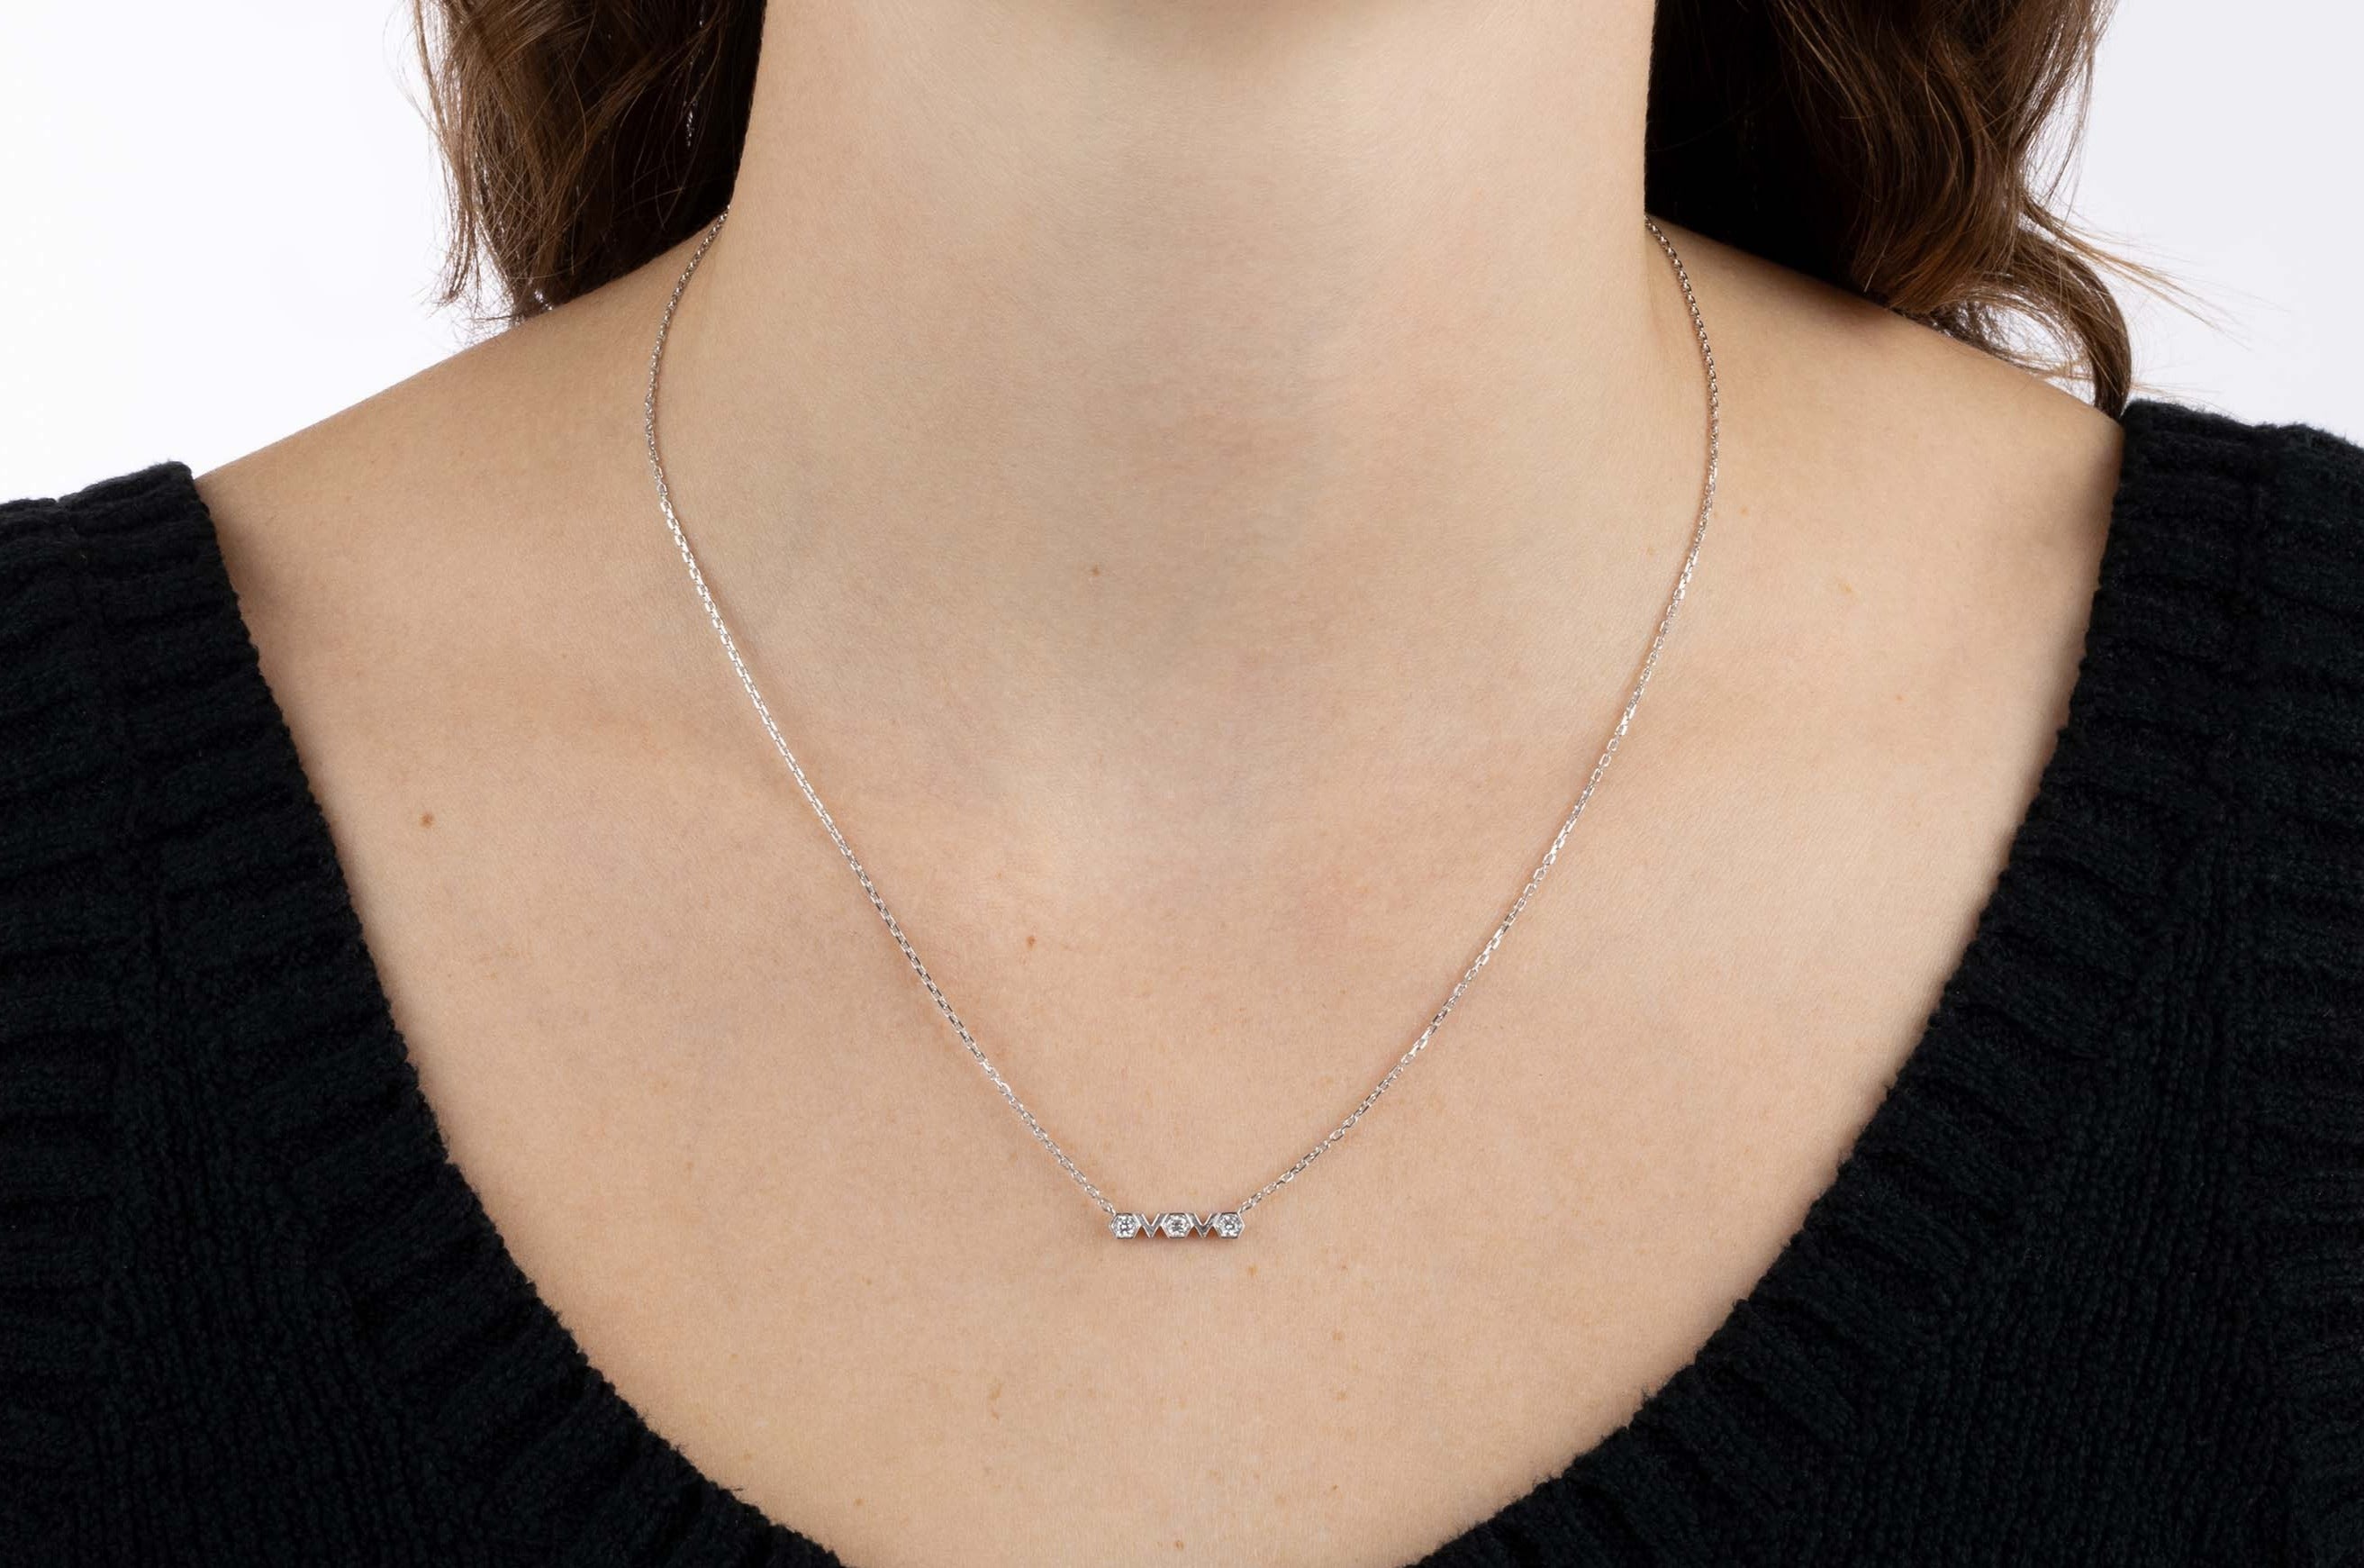 White Gold Necklace with hexagons and V shapes, and Diamonds, Small - Model shot